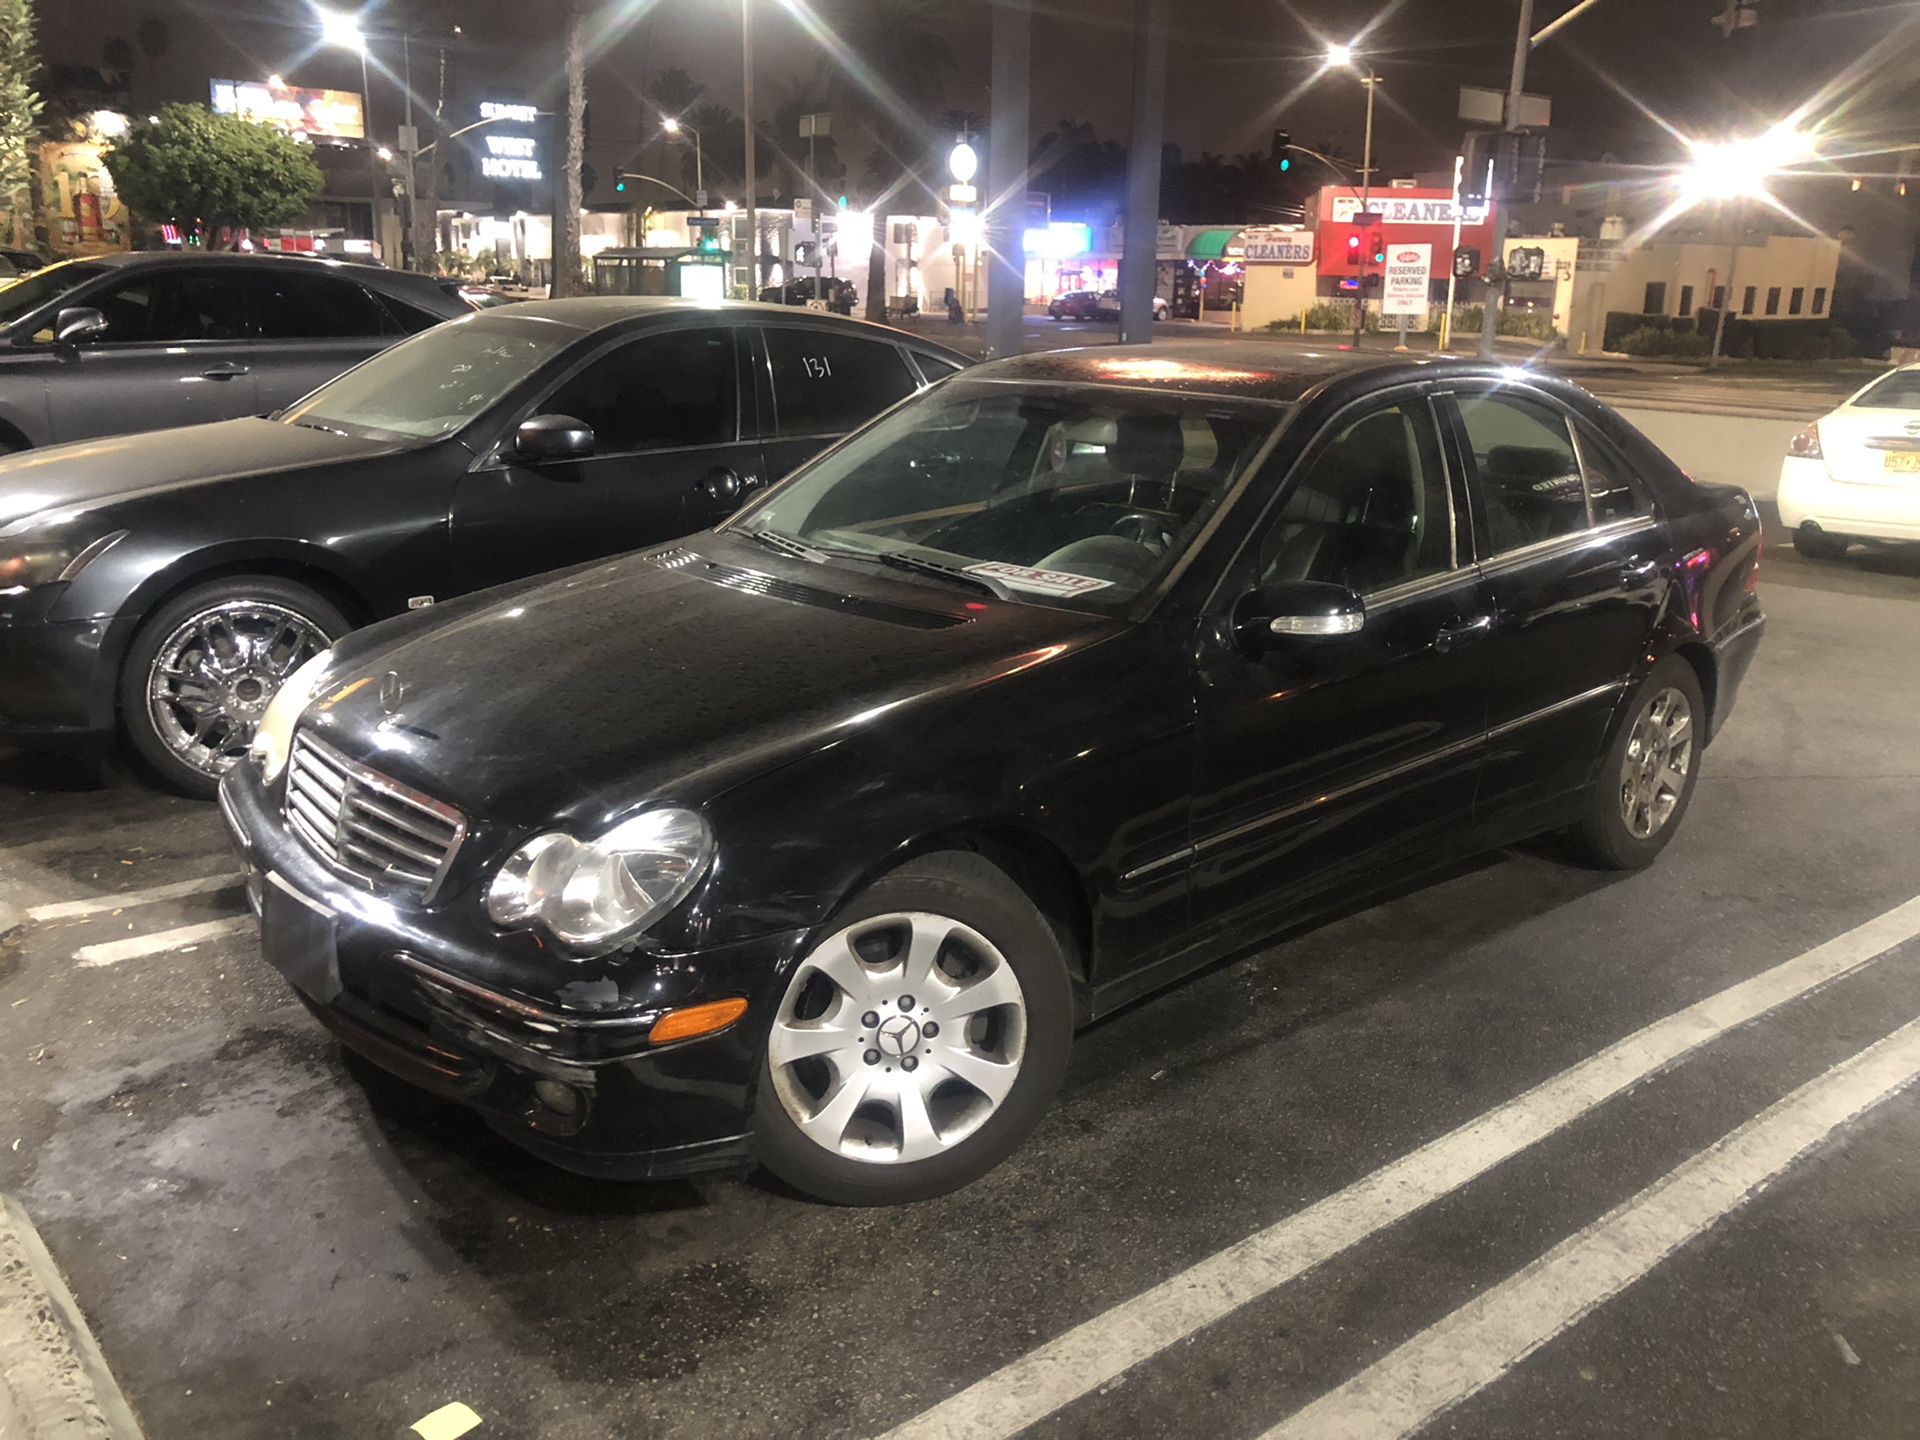 2006 c320 Benz for sale for part of whole. Will not part out